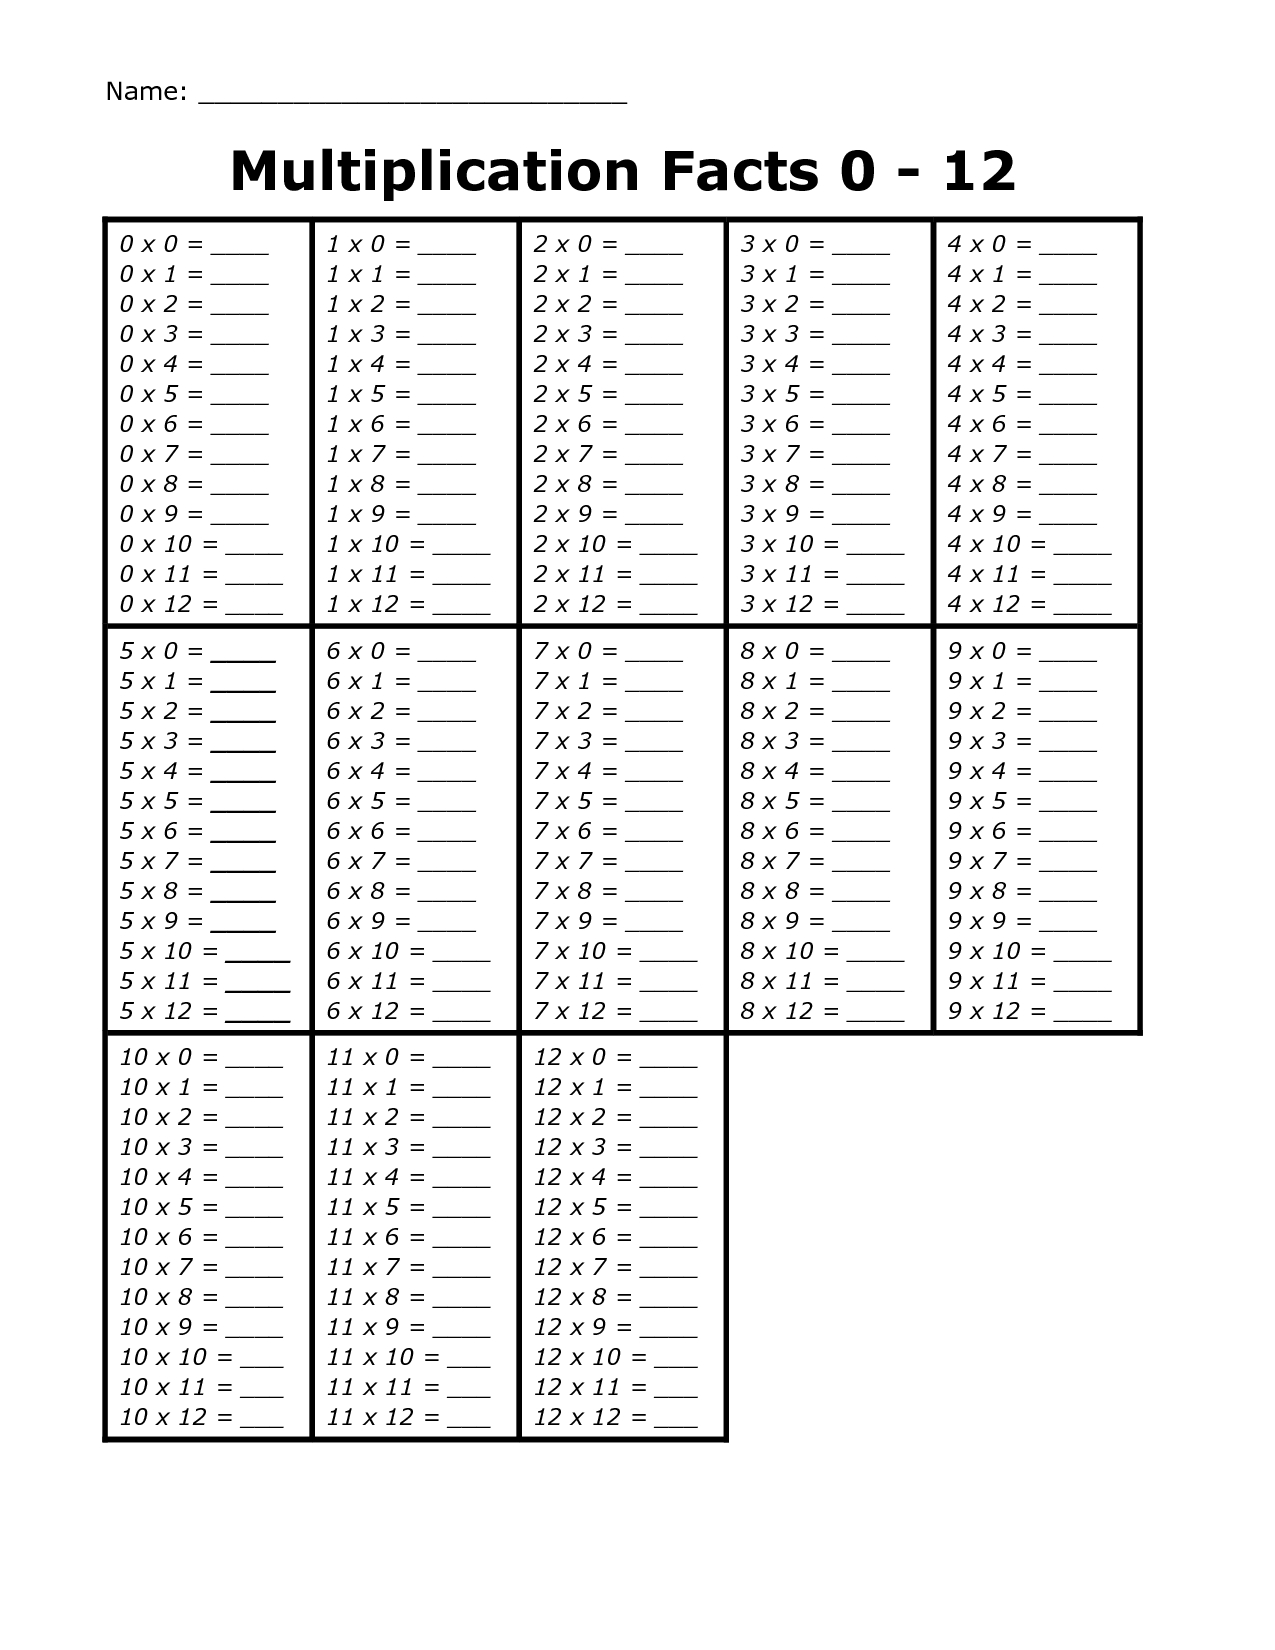 Printable Multiplication Facts 0 12 | Multiplication Facts regarding Printable Multiplication Worksheets 0-12